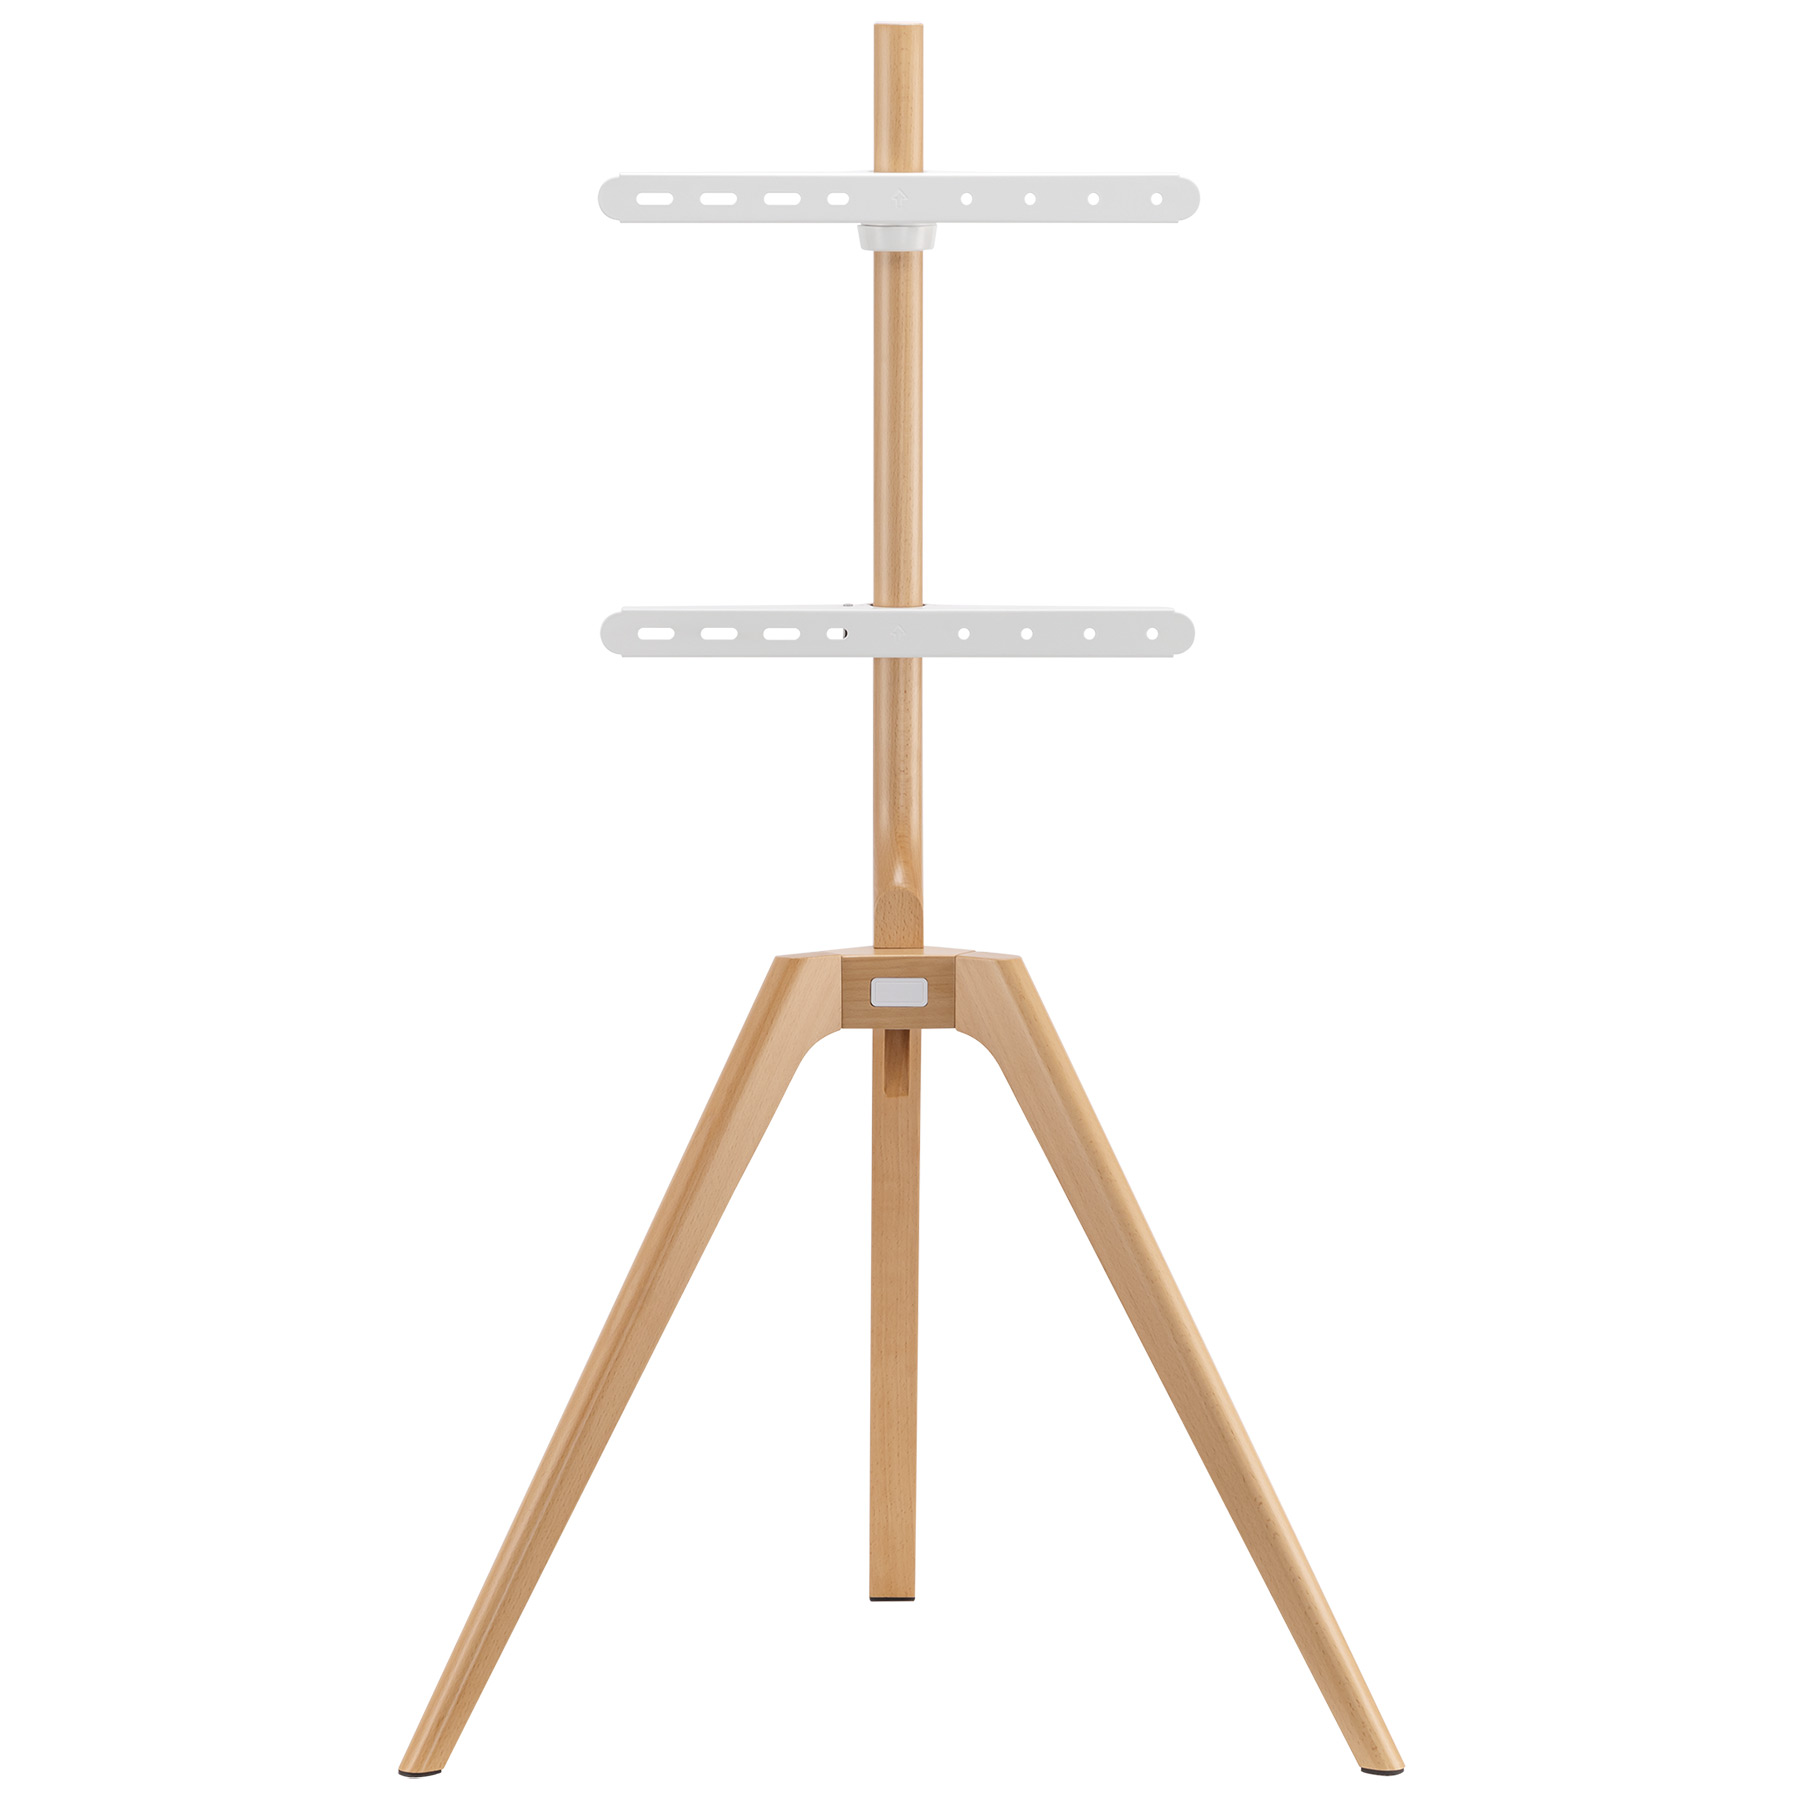 Image of TTAP TRIPOD LIGHT Tripod Easel Style Stand with VESA Mount in Light Wo